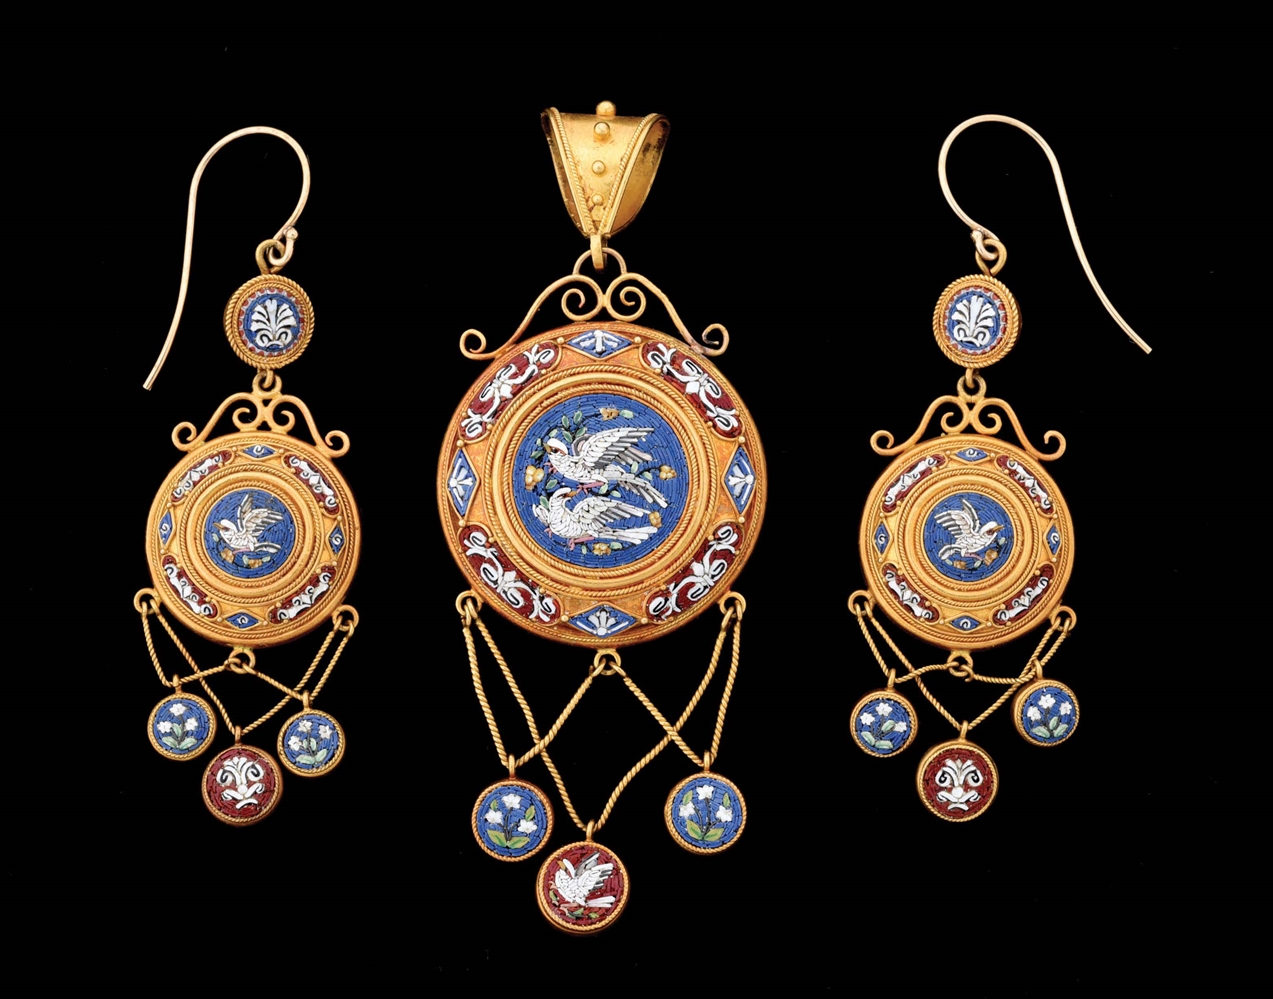 EXQUISITE 18K YELLOW GOLD MICROMOSAIC PENDANT AND EARRINGS.